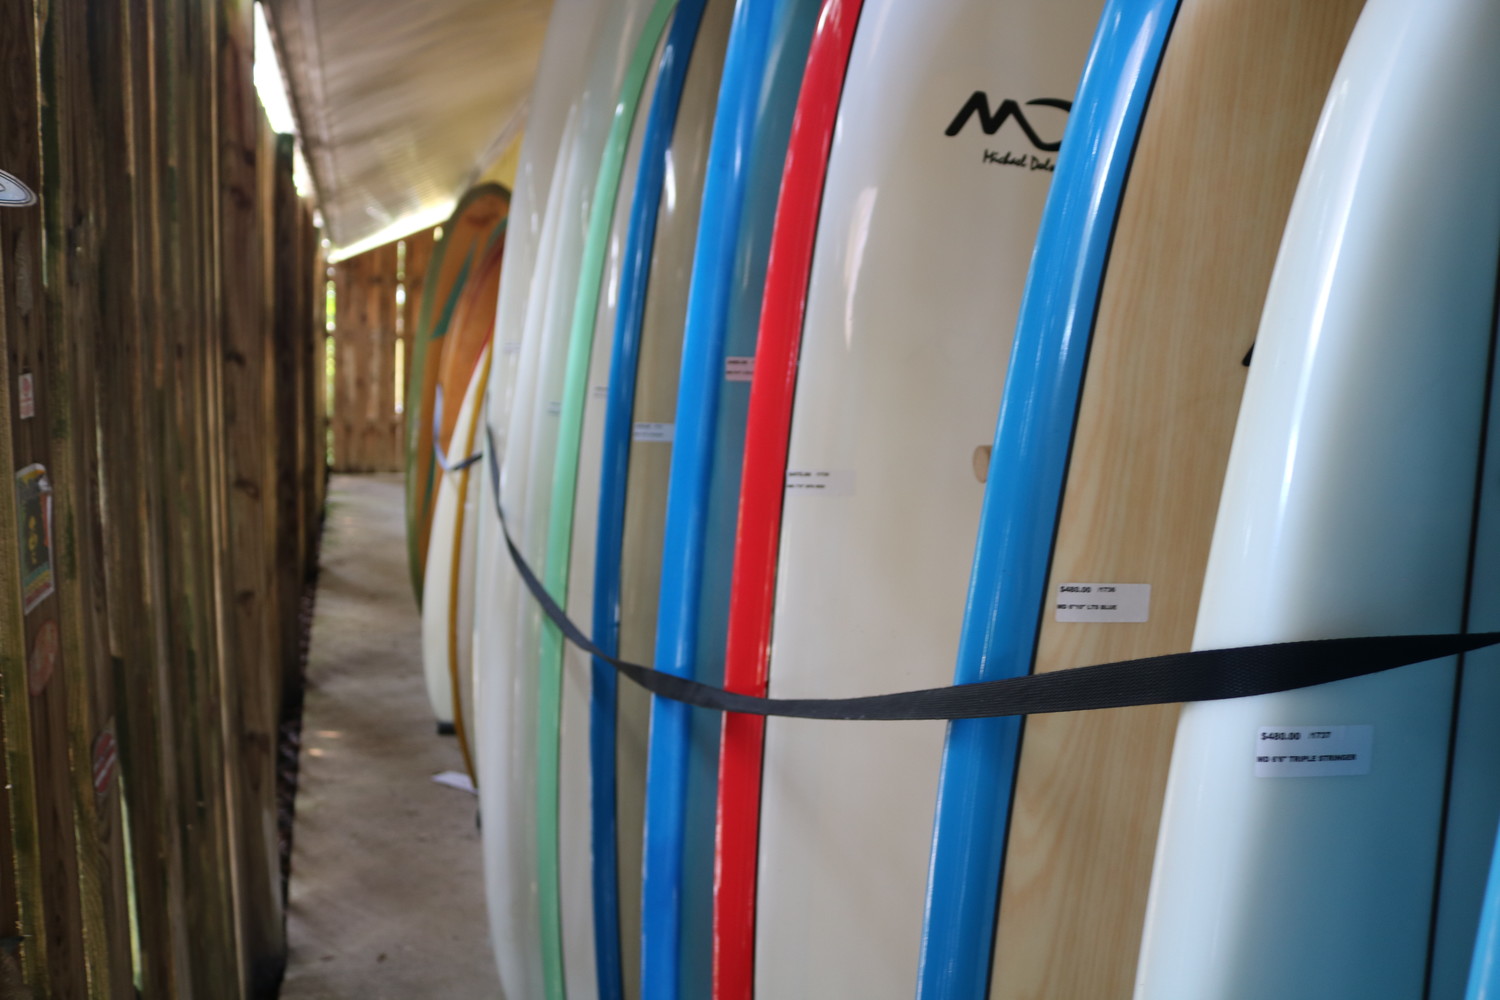 Fort George Surf Shop is home to surfboards, stand up paddleboards, kayaks and more.